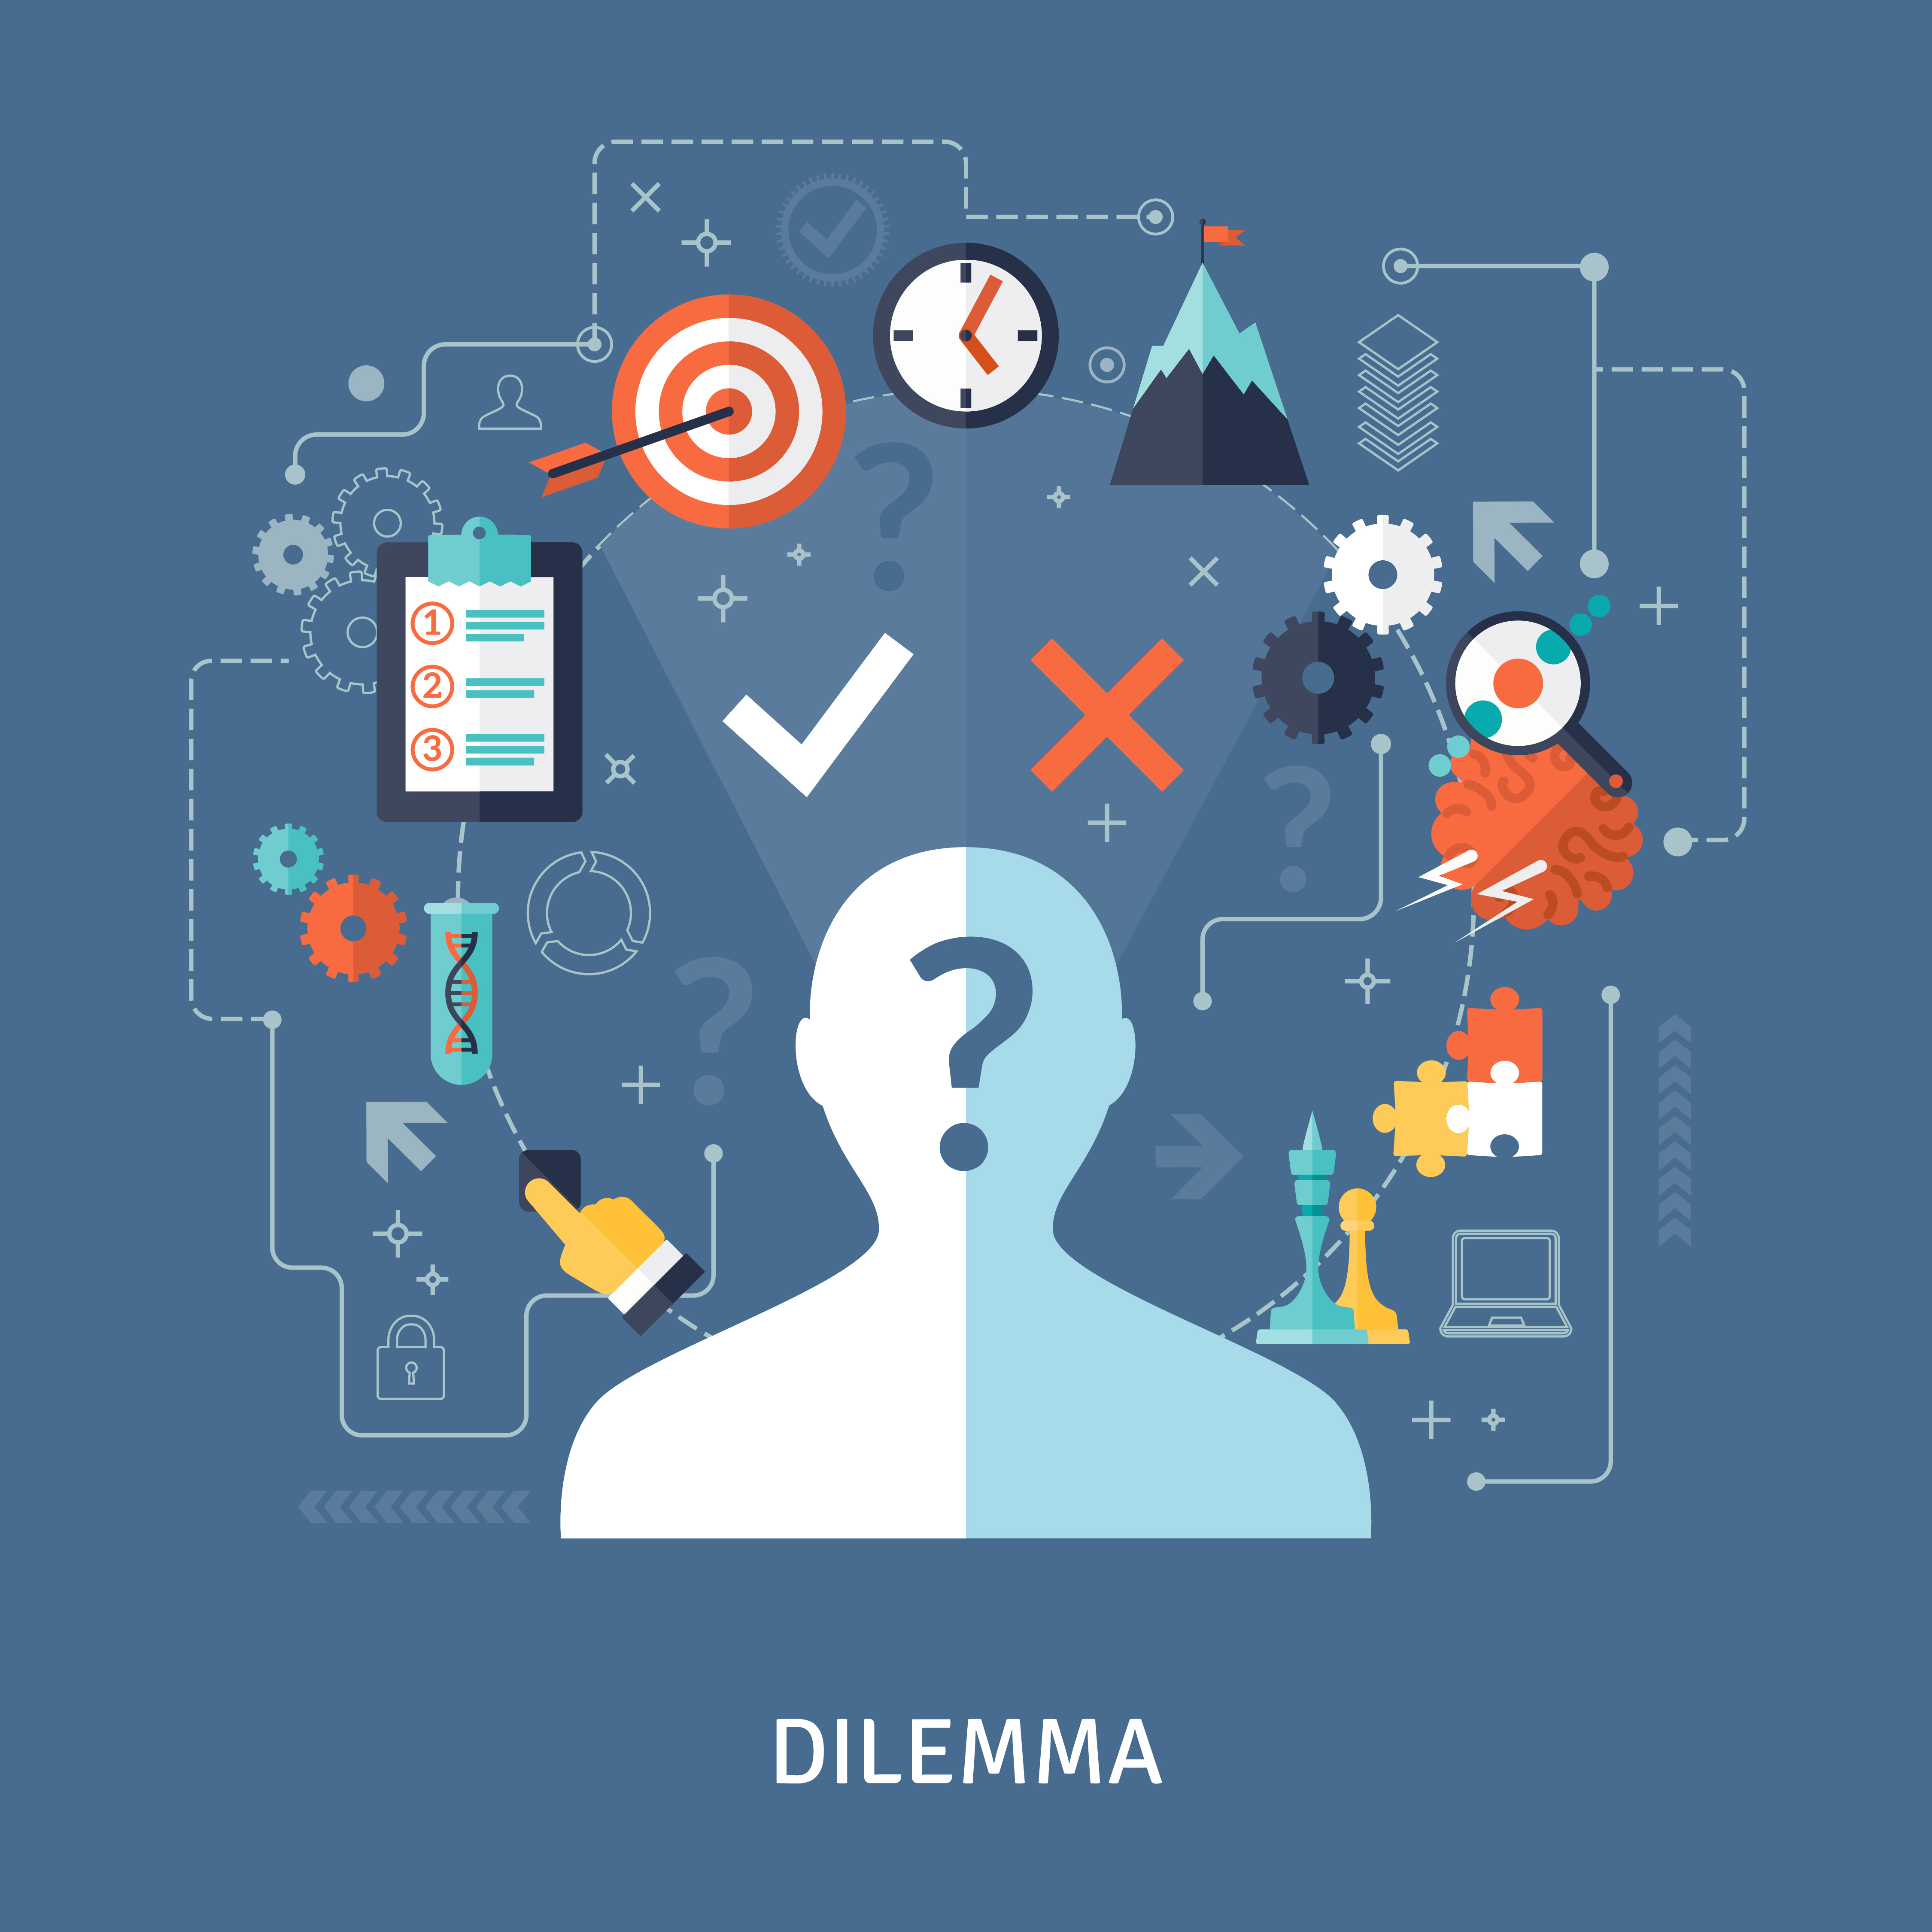 before your presentation you are caught in a dilemma